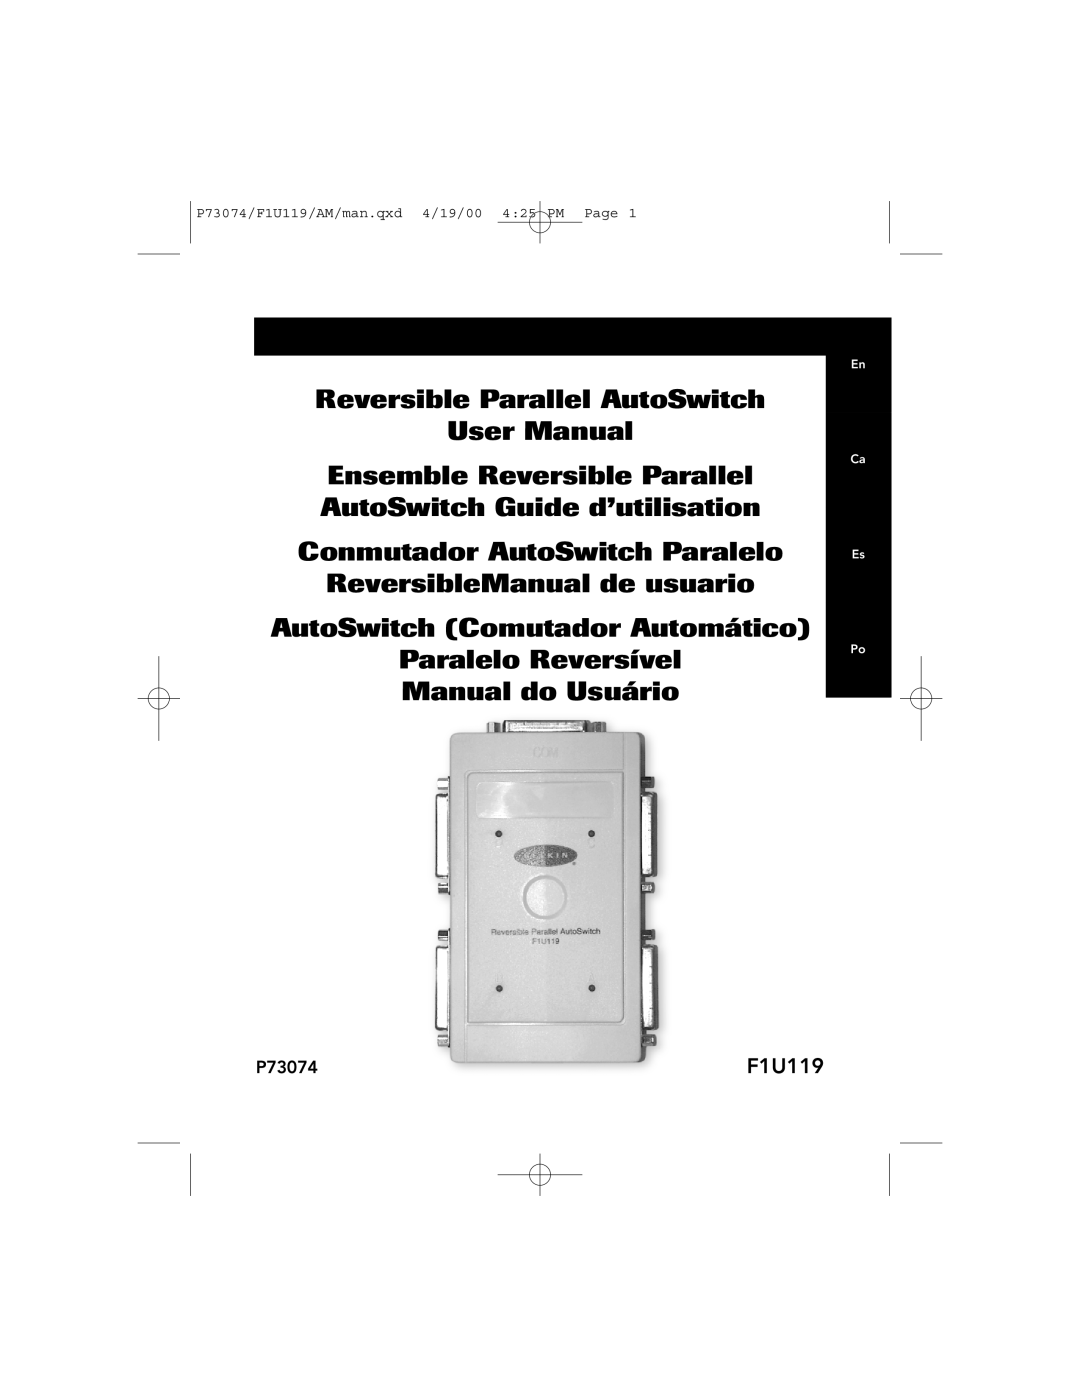 Belkin user manual Reversible Parallel AutoSwitch User Manual, P73074/F1U119/AM/man.qxd 4/19/00 425 PM Page 